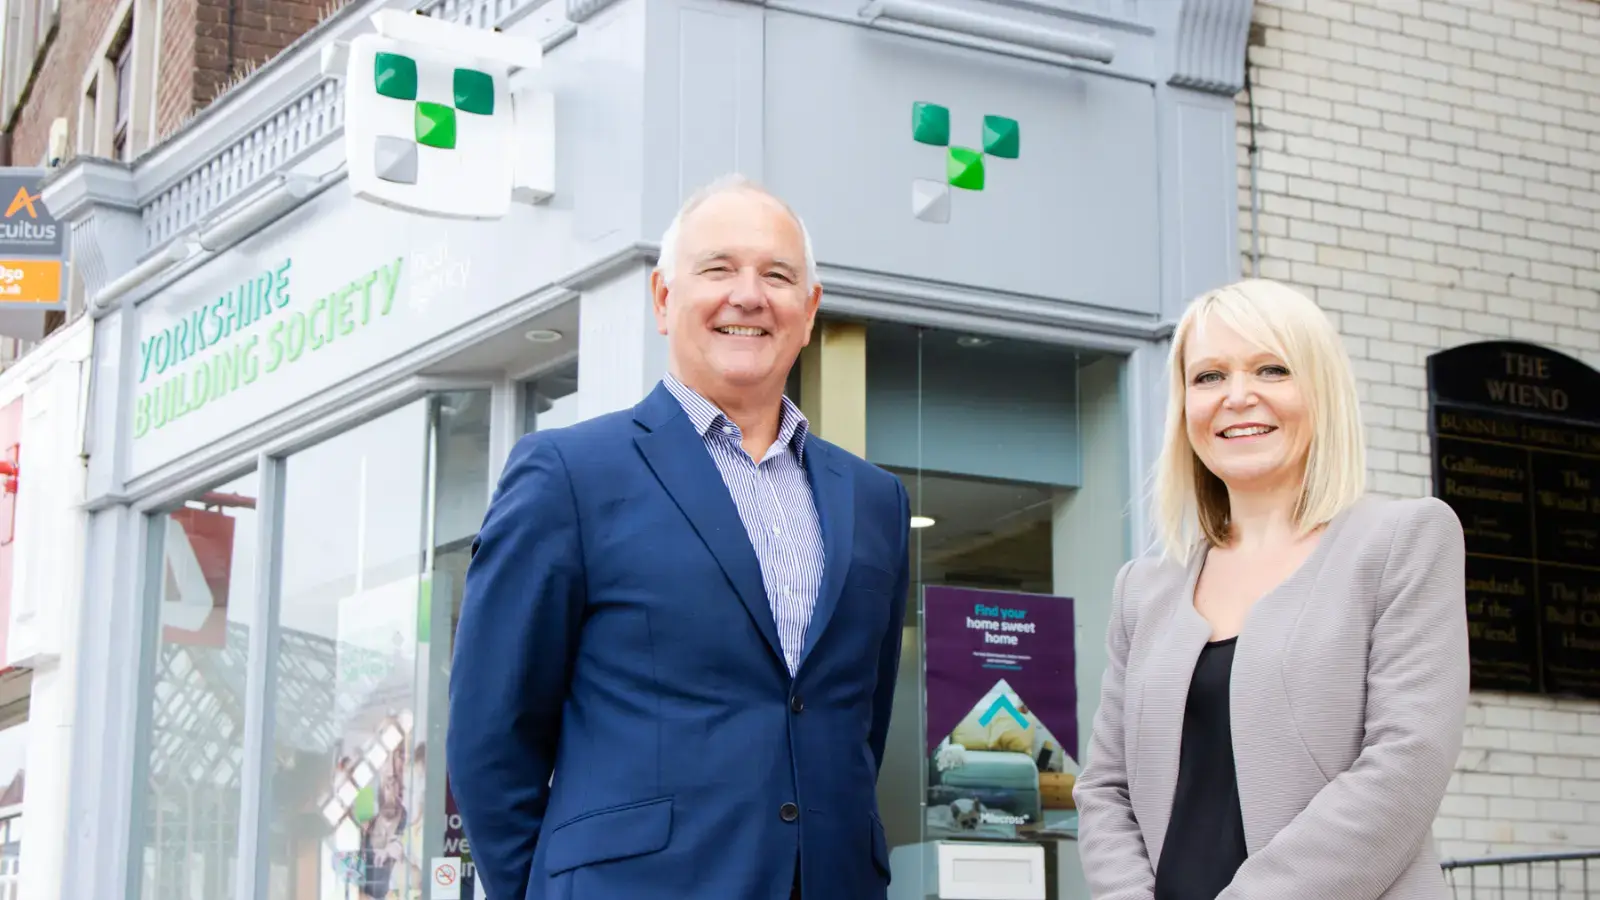 Future prospects and growth opportunities for Yorkshire Building Society 